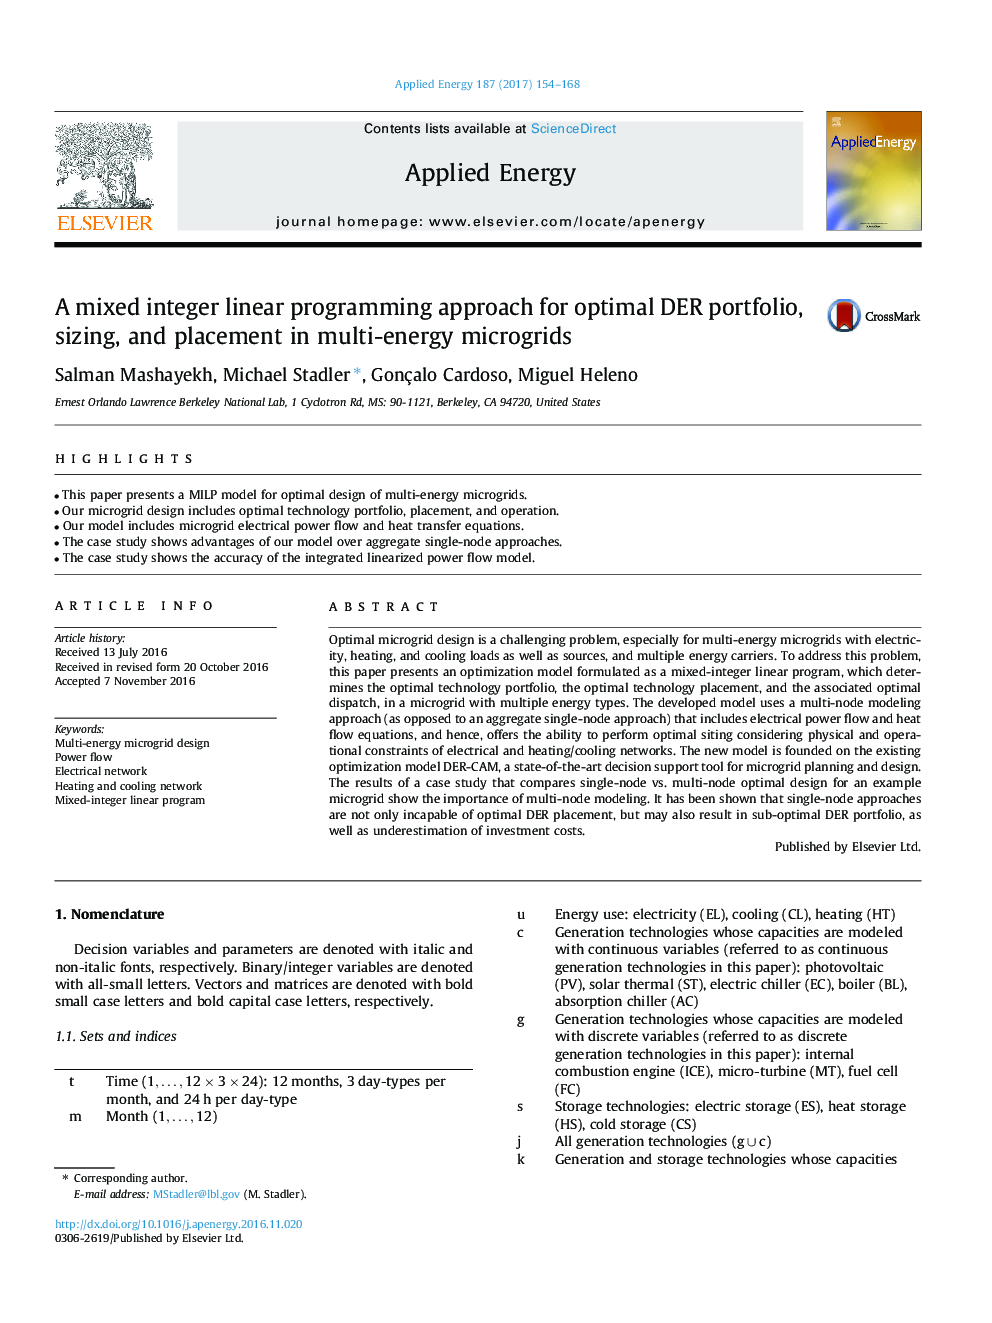 A mixed integer linear programming approach for optimal DER portfolio, sizing, and placement in multi-energy microgrids